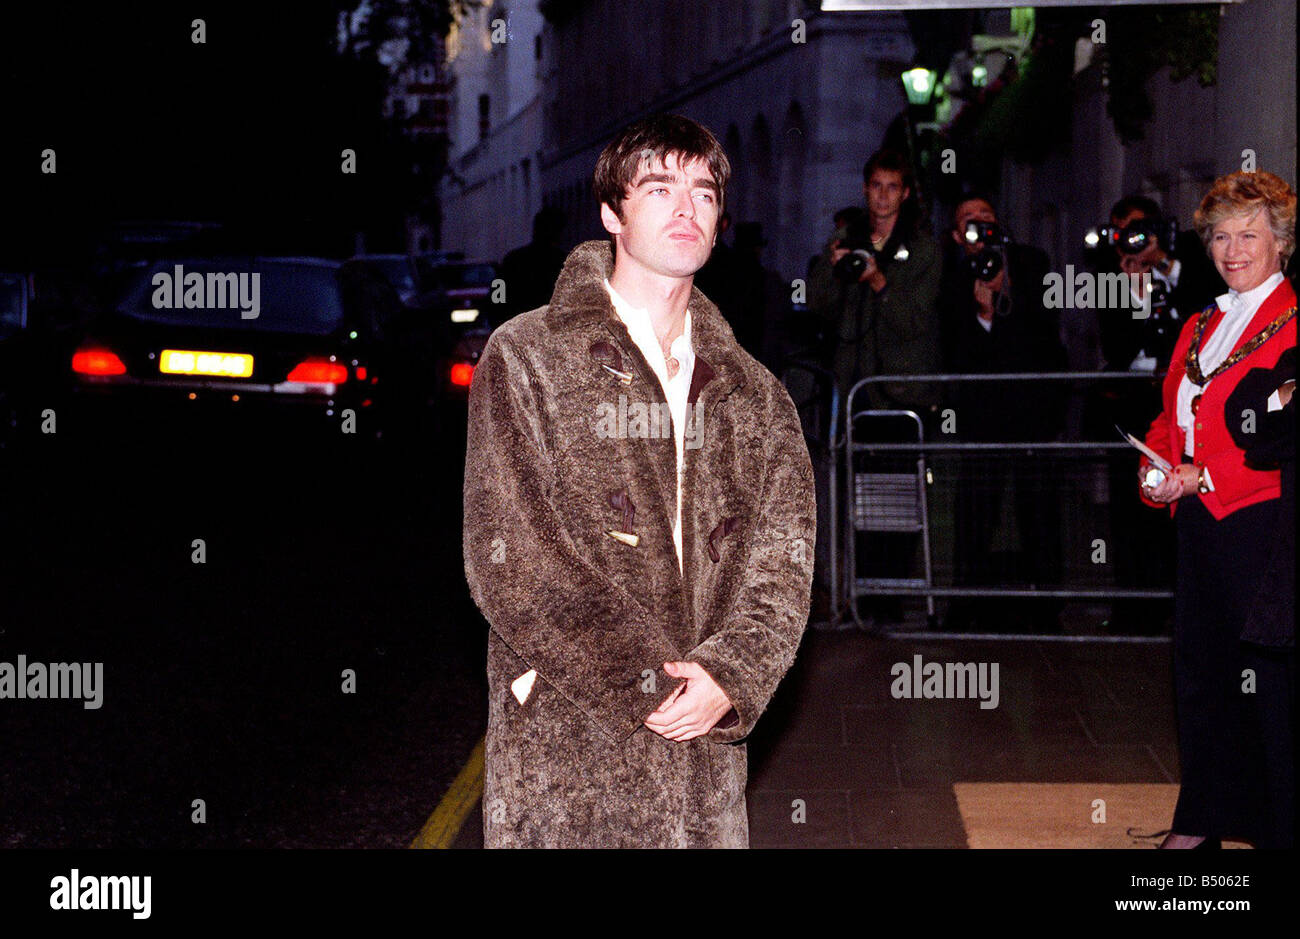 Noel Gallagher lead singer of the pop group Oasis arriving for the Mercury awards in London Stock Photo